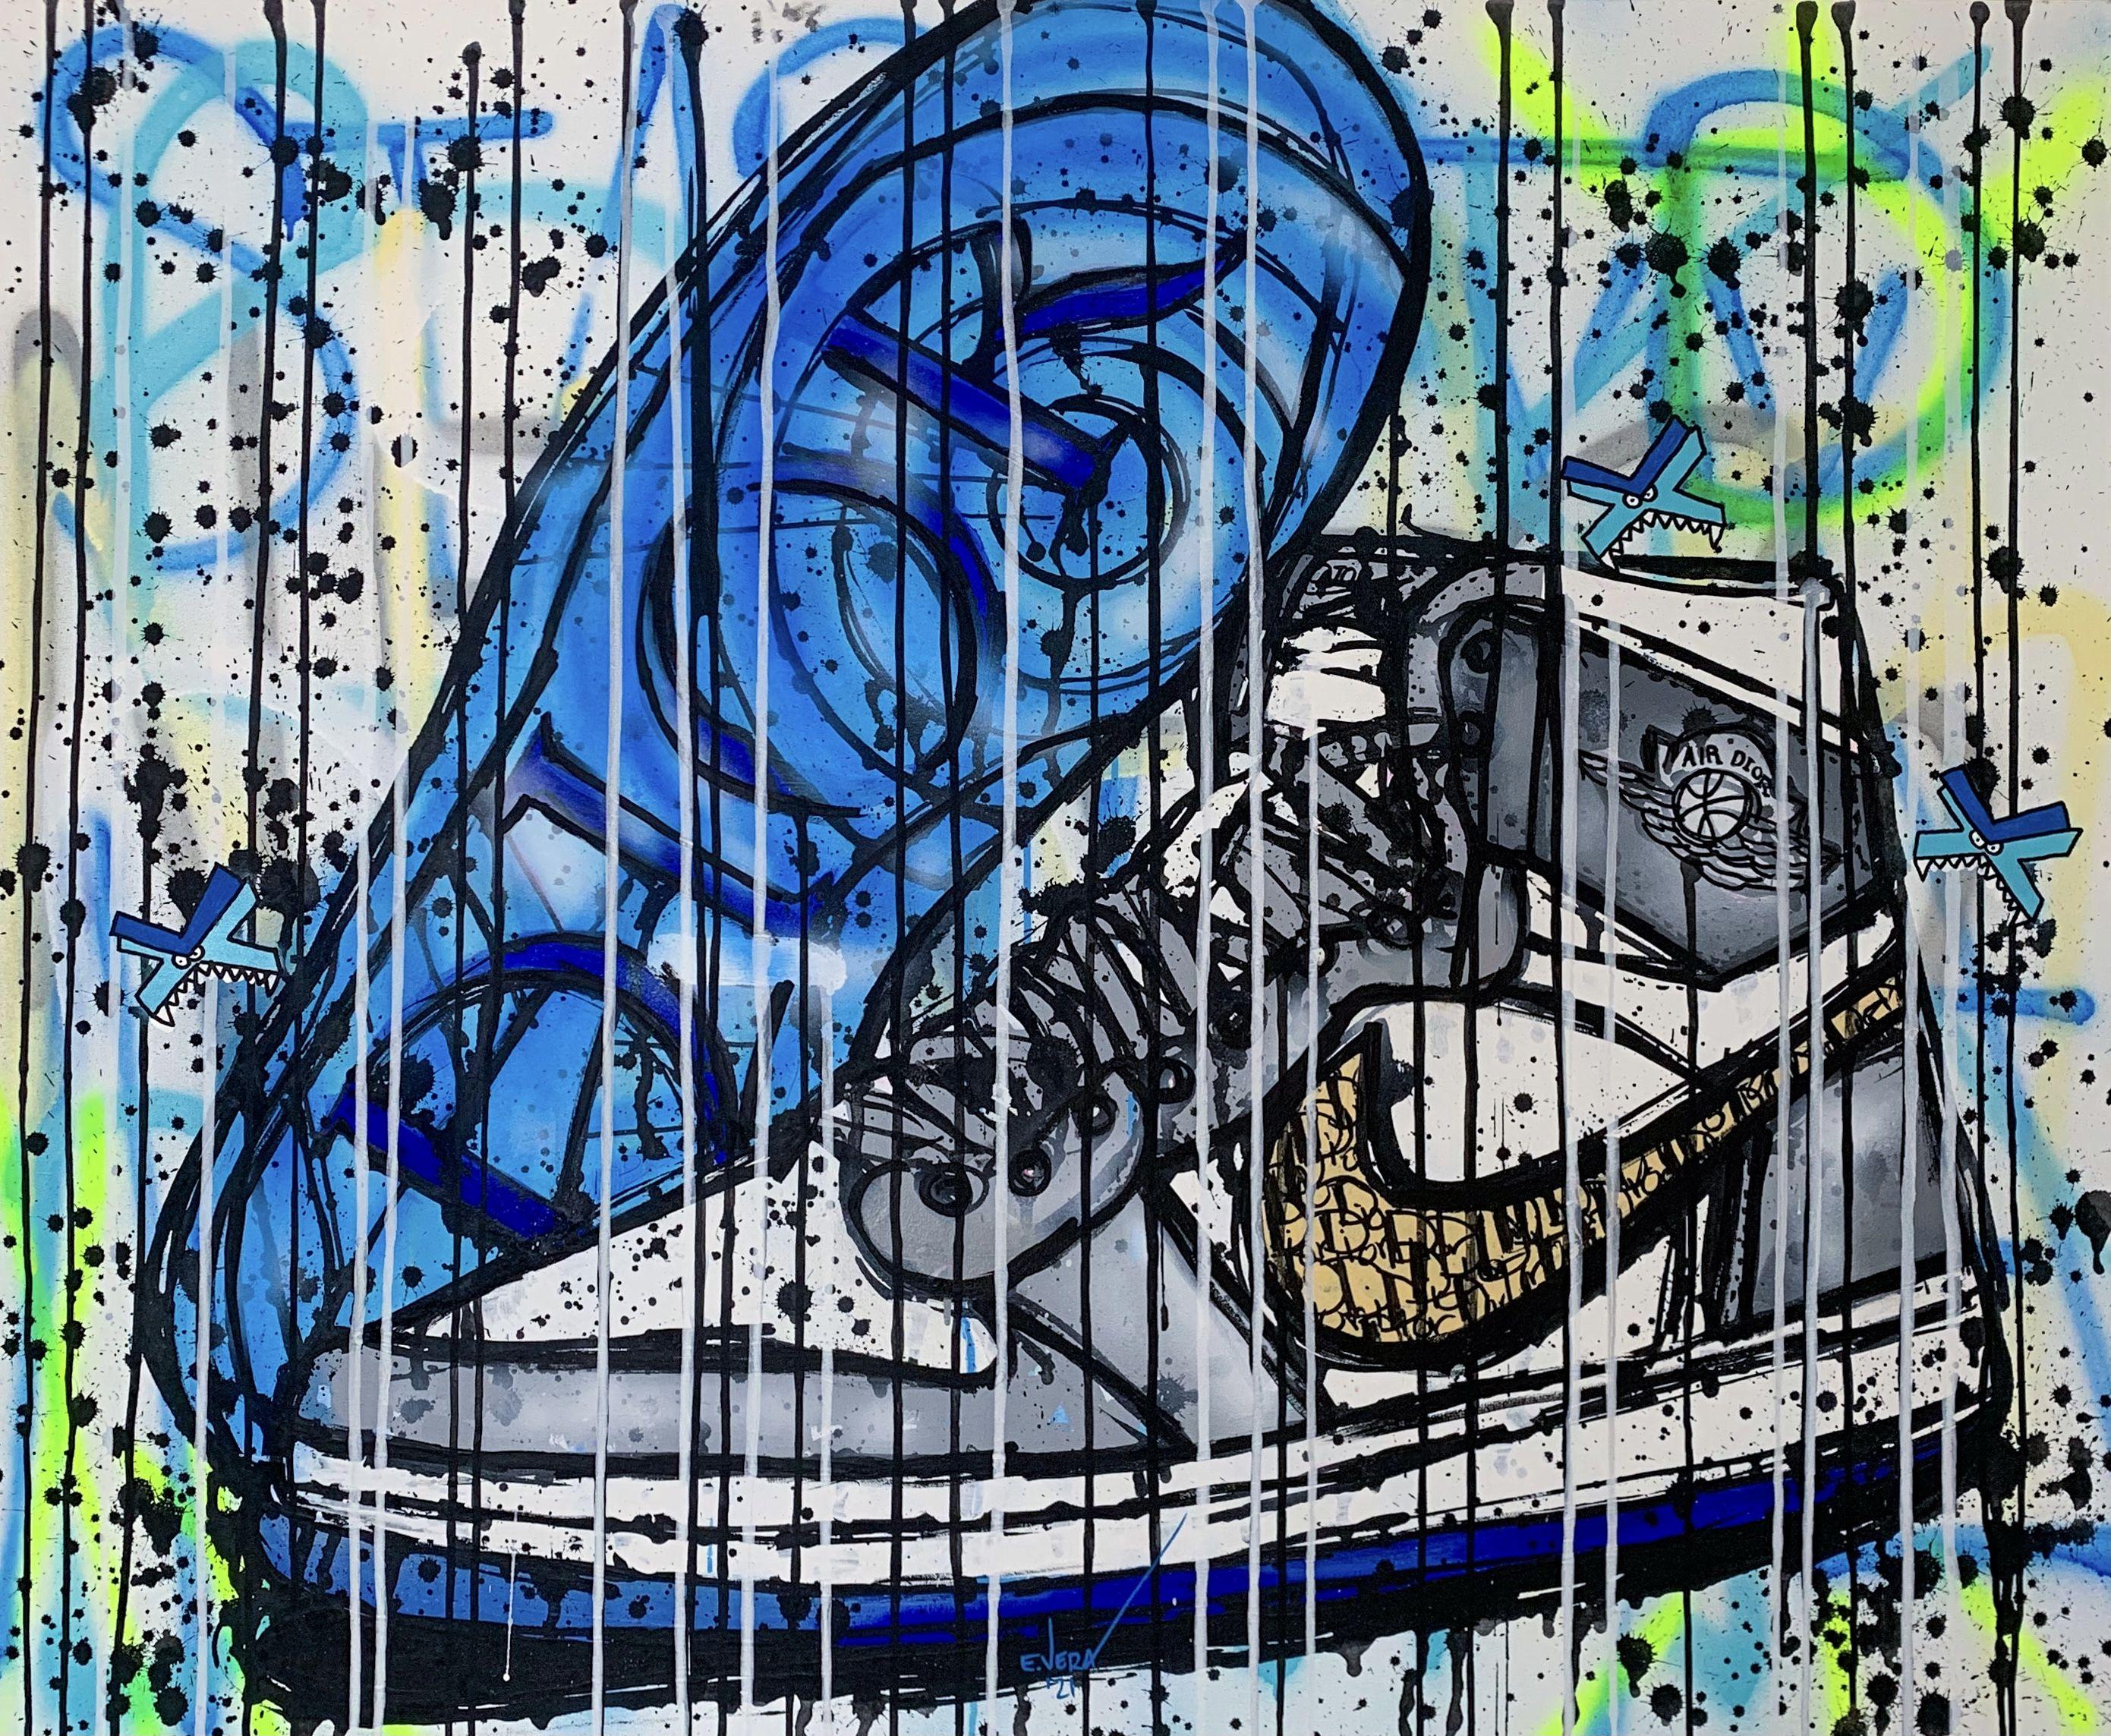 Nike Air Jordan X Dior inspired, great colors, acrylic and spray on canvas, great art work, exhibitions in the best Art Galleries in France, USA and Mexico. :: Painting :: Pop-Art :: This piece comes with an official certificate of authenticity